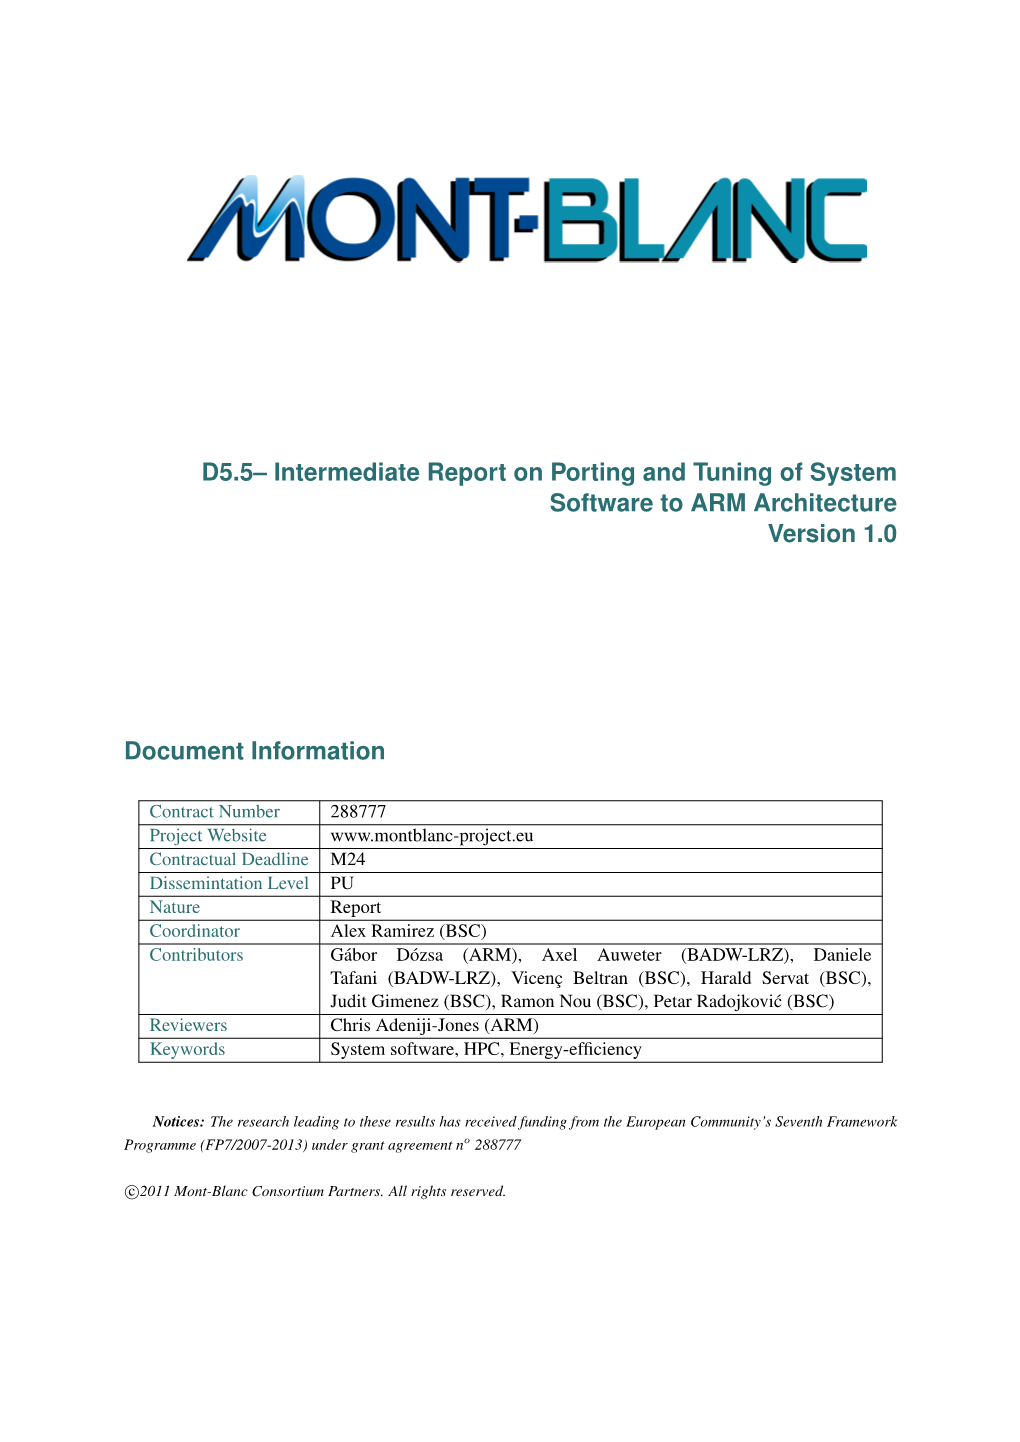 D5.5– Intermediate Report on Porting and Tuning of System Software to ARM Architecture Version 1.0